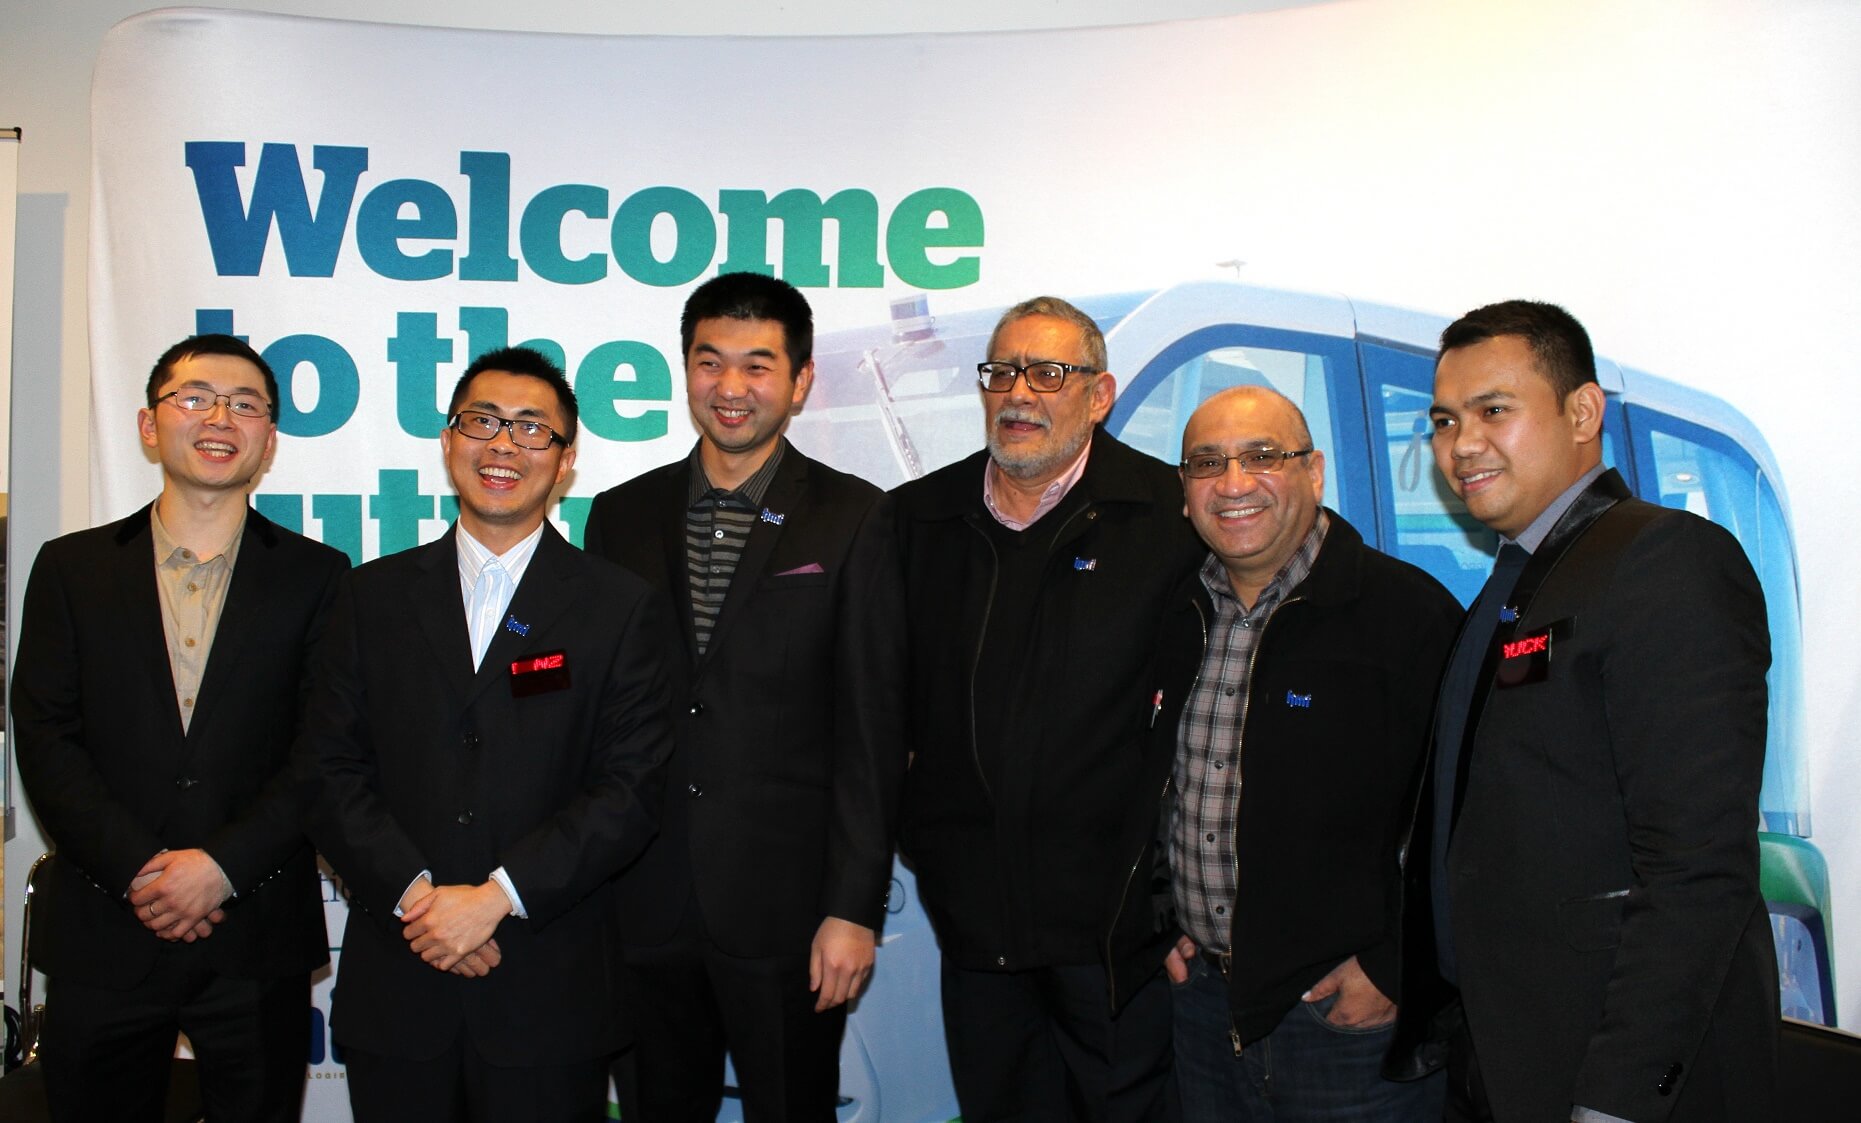 HMI Technologies' Service and Delivery team members from Auckland and Christchurch